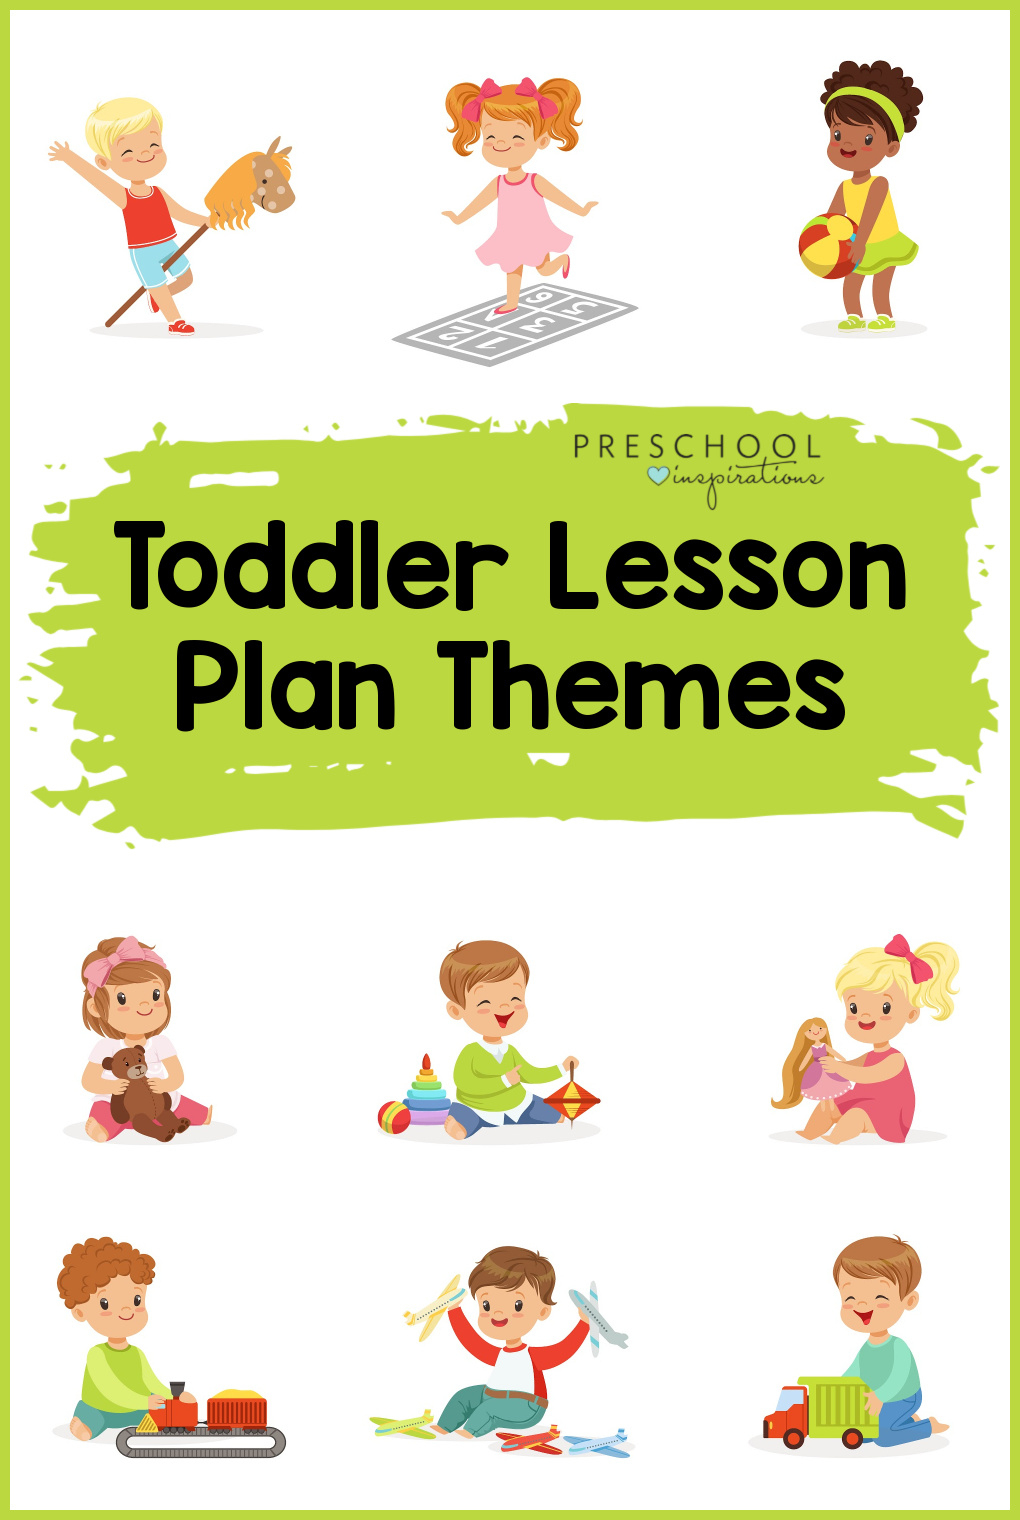 Toddler Lesson Plans And Themes - Preschool Inspirations